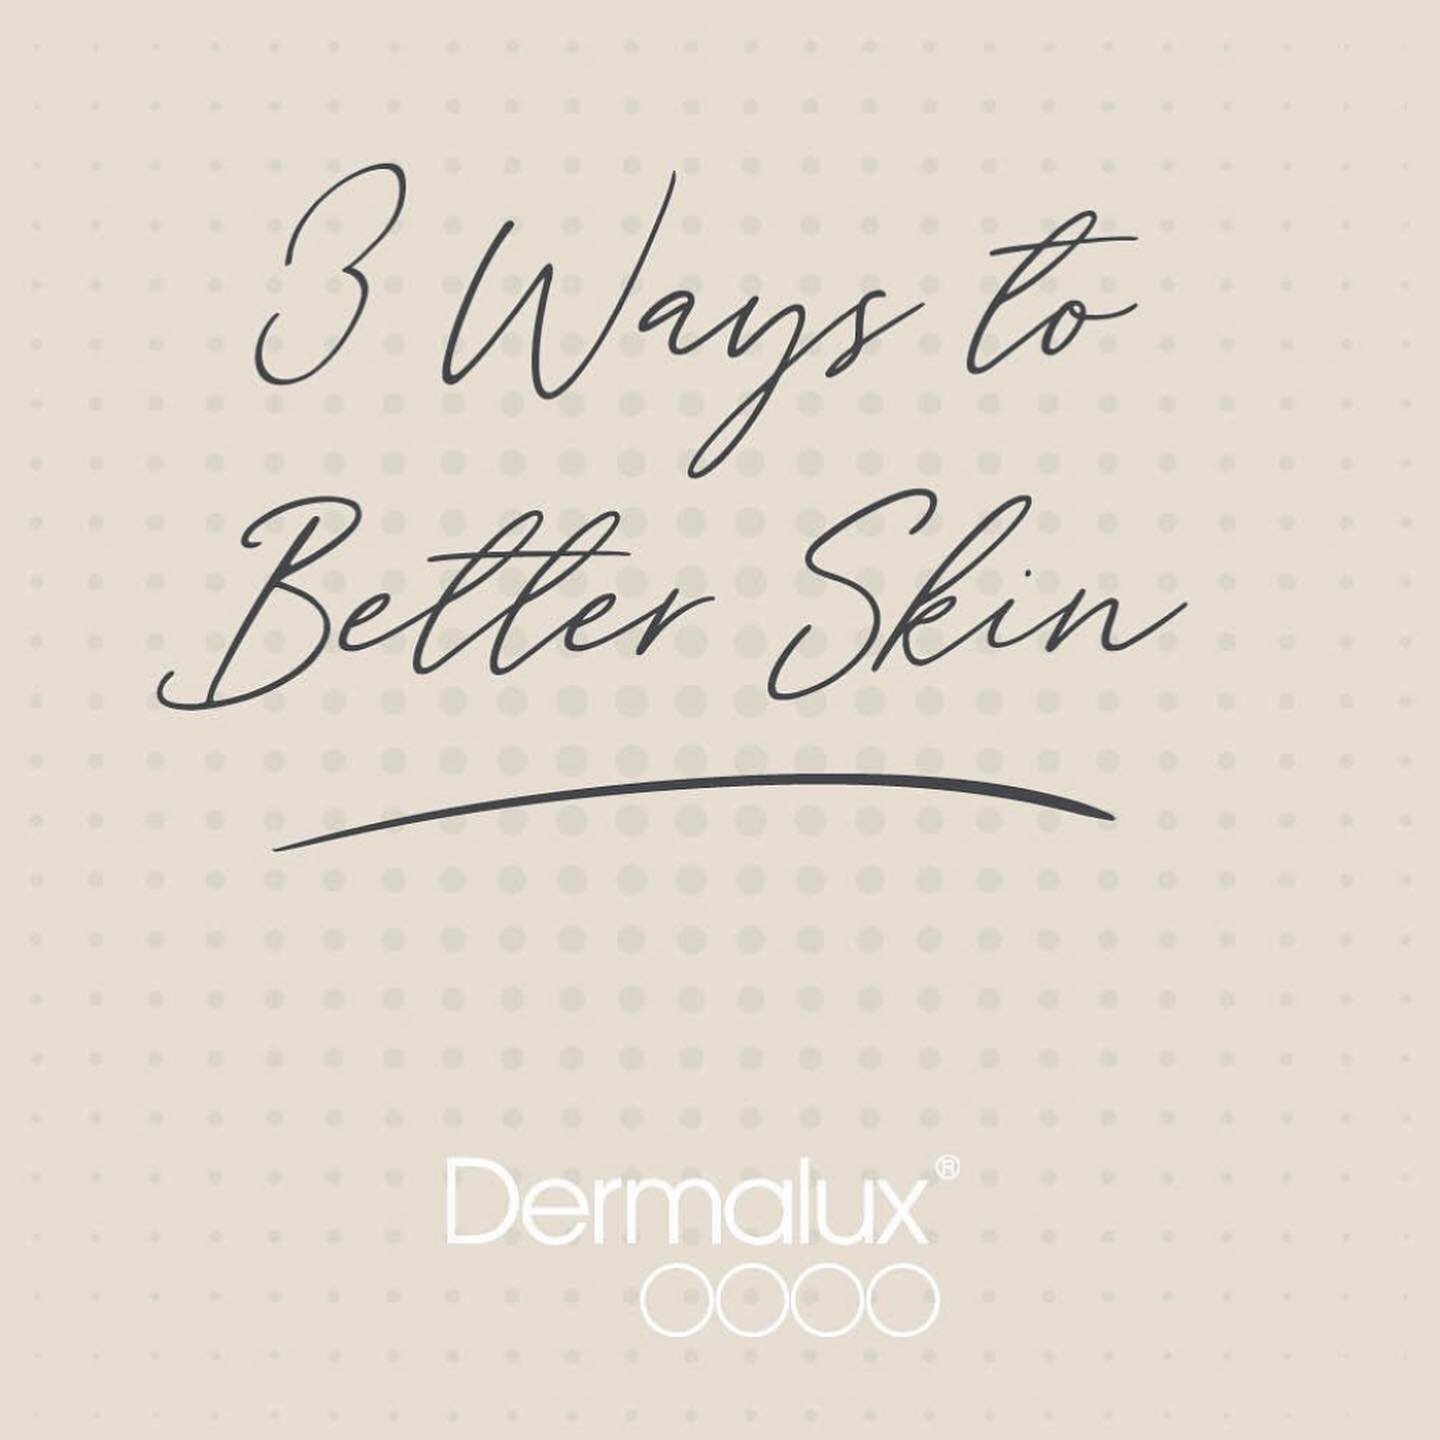 Dermalux led works by using controlled light which penetrate different layers of the skin to energise our cells.
Supercharging cells to function better and regenerate up to 200% faster!! This in turn leads to more youthful, healthy and more radiant s